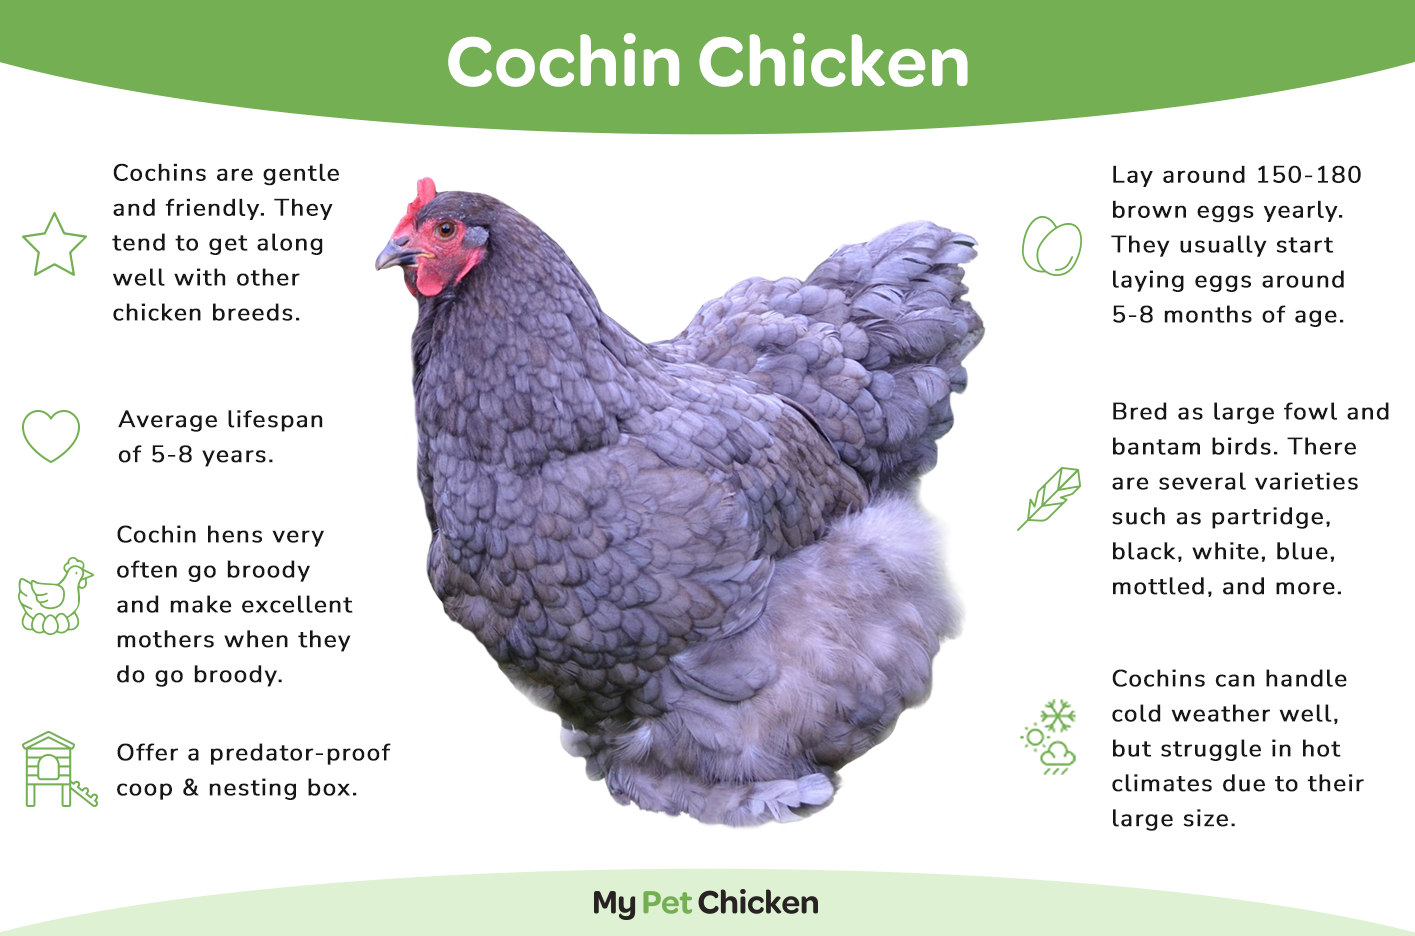 Cochins are known for being big friendly balls of fluff and feathers.